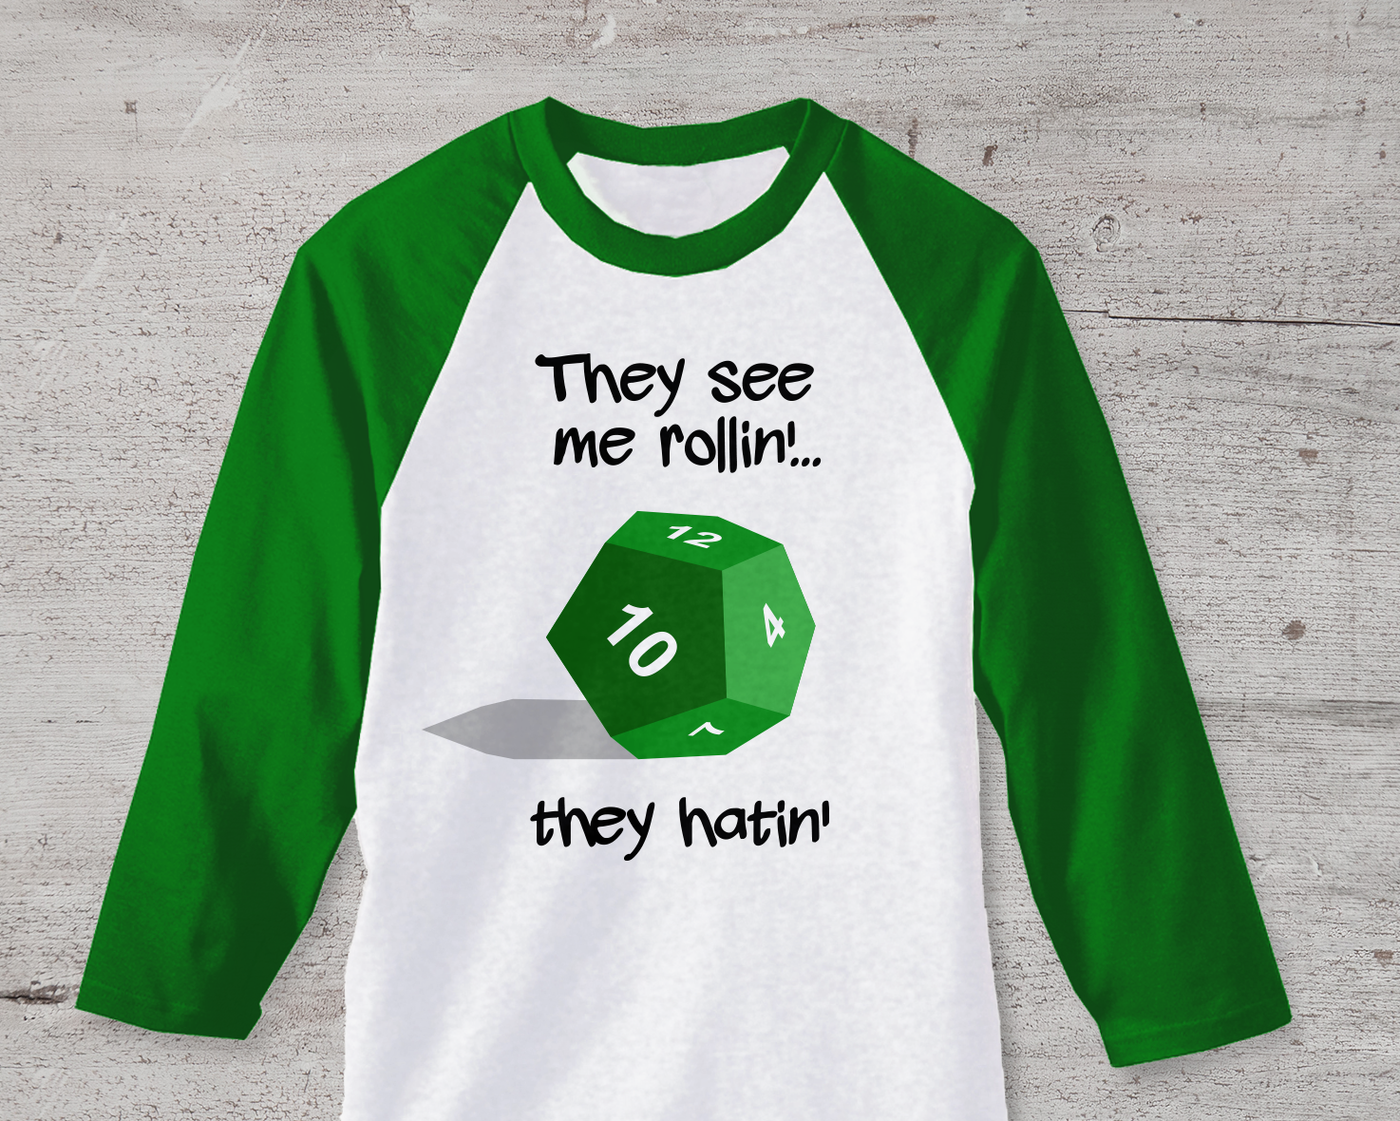 A green and white raglan tee sits on a cement background. There is a green 12-sided die in the center with the words "They see me rollin'... they hatin'" around it.